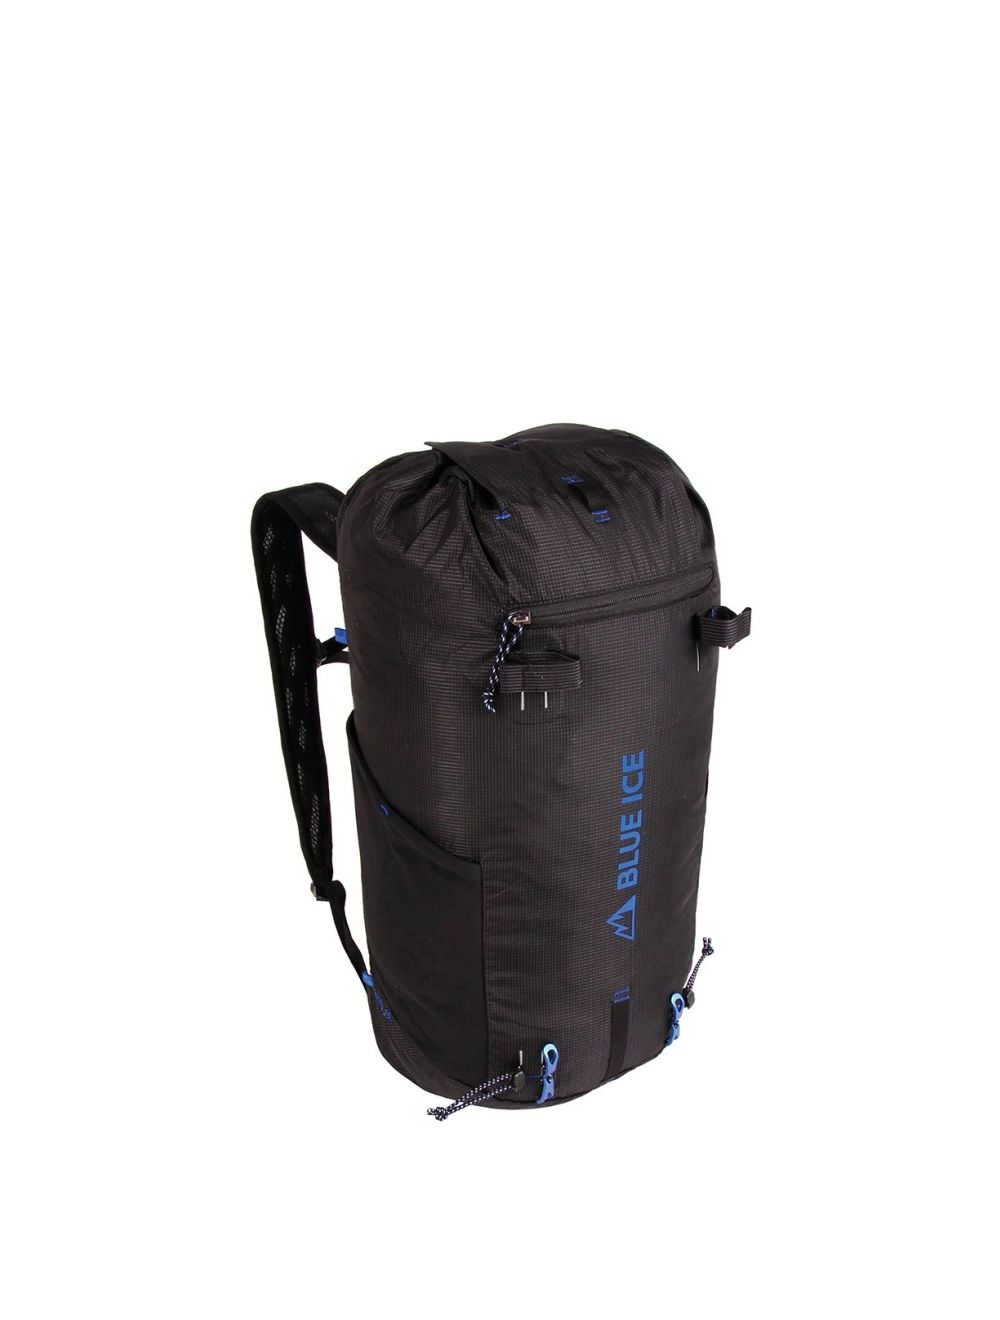 BLUE ICE Plecak wspinaczkowy DRAGONFLY PACK 25 L black